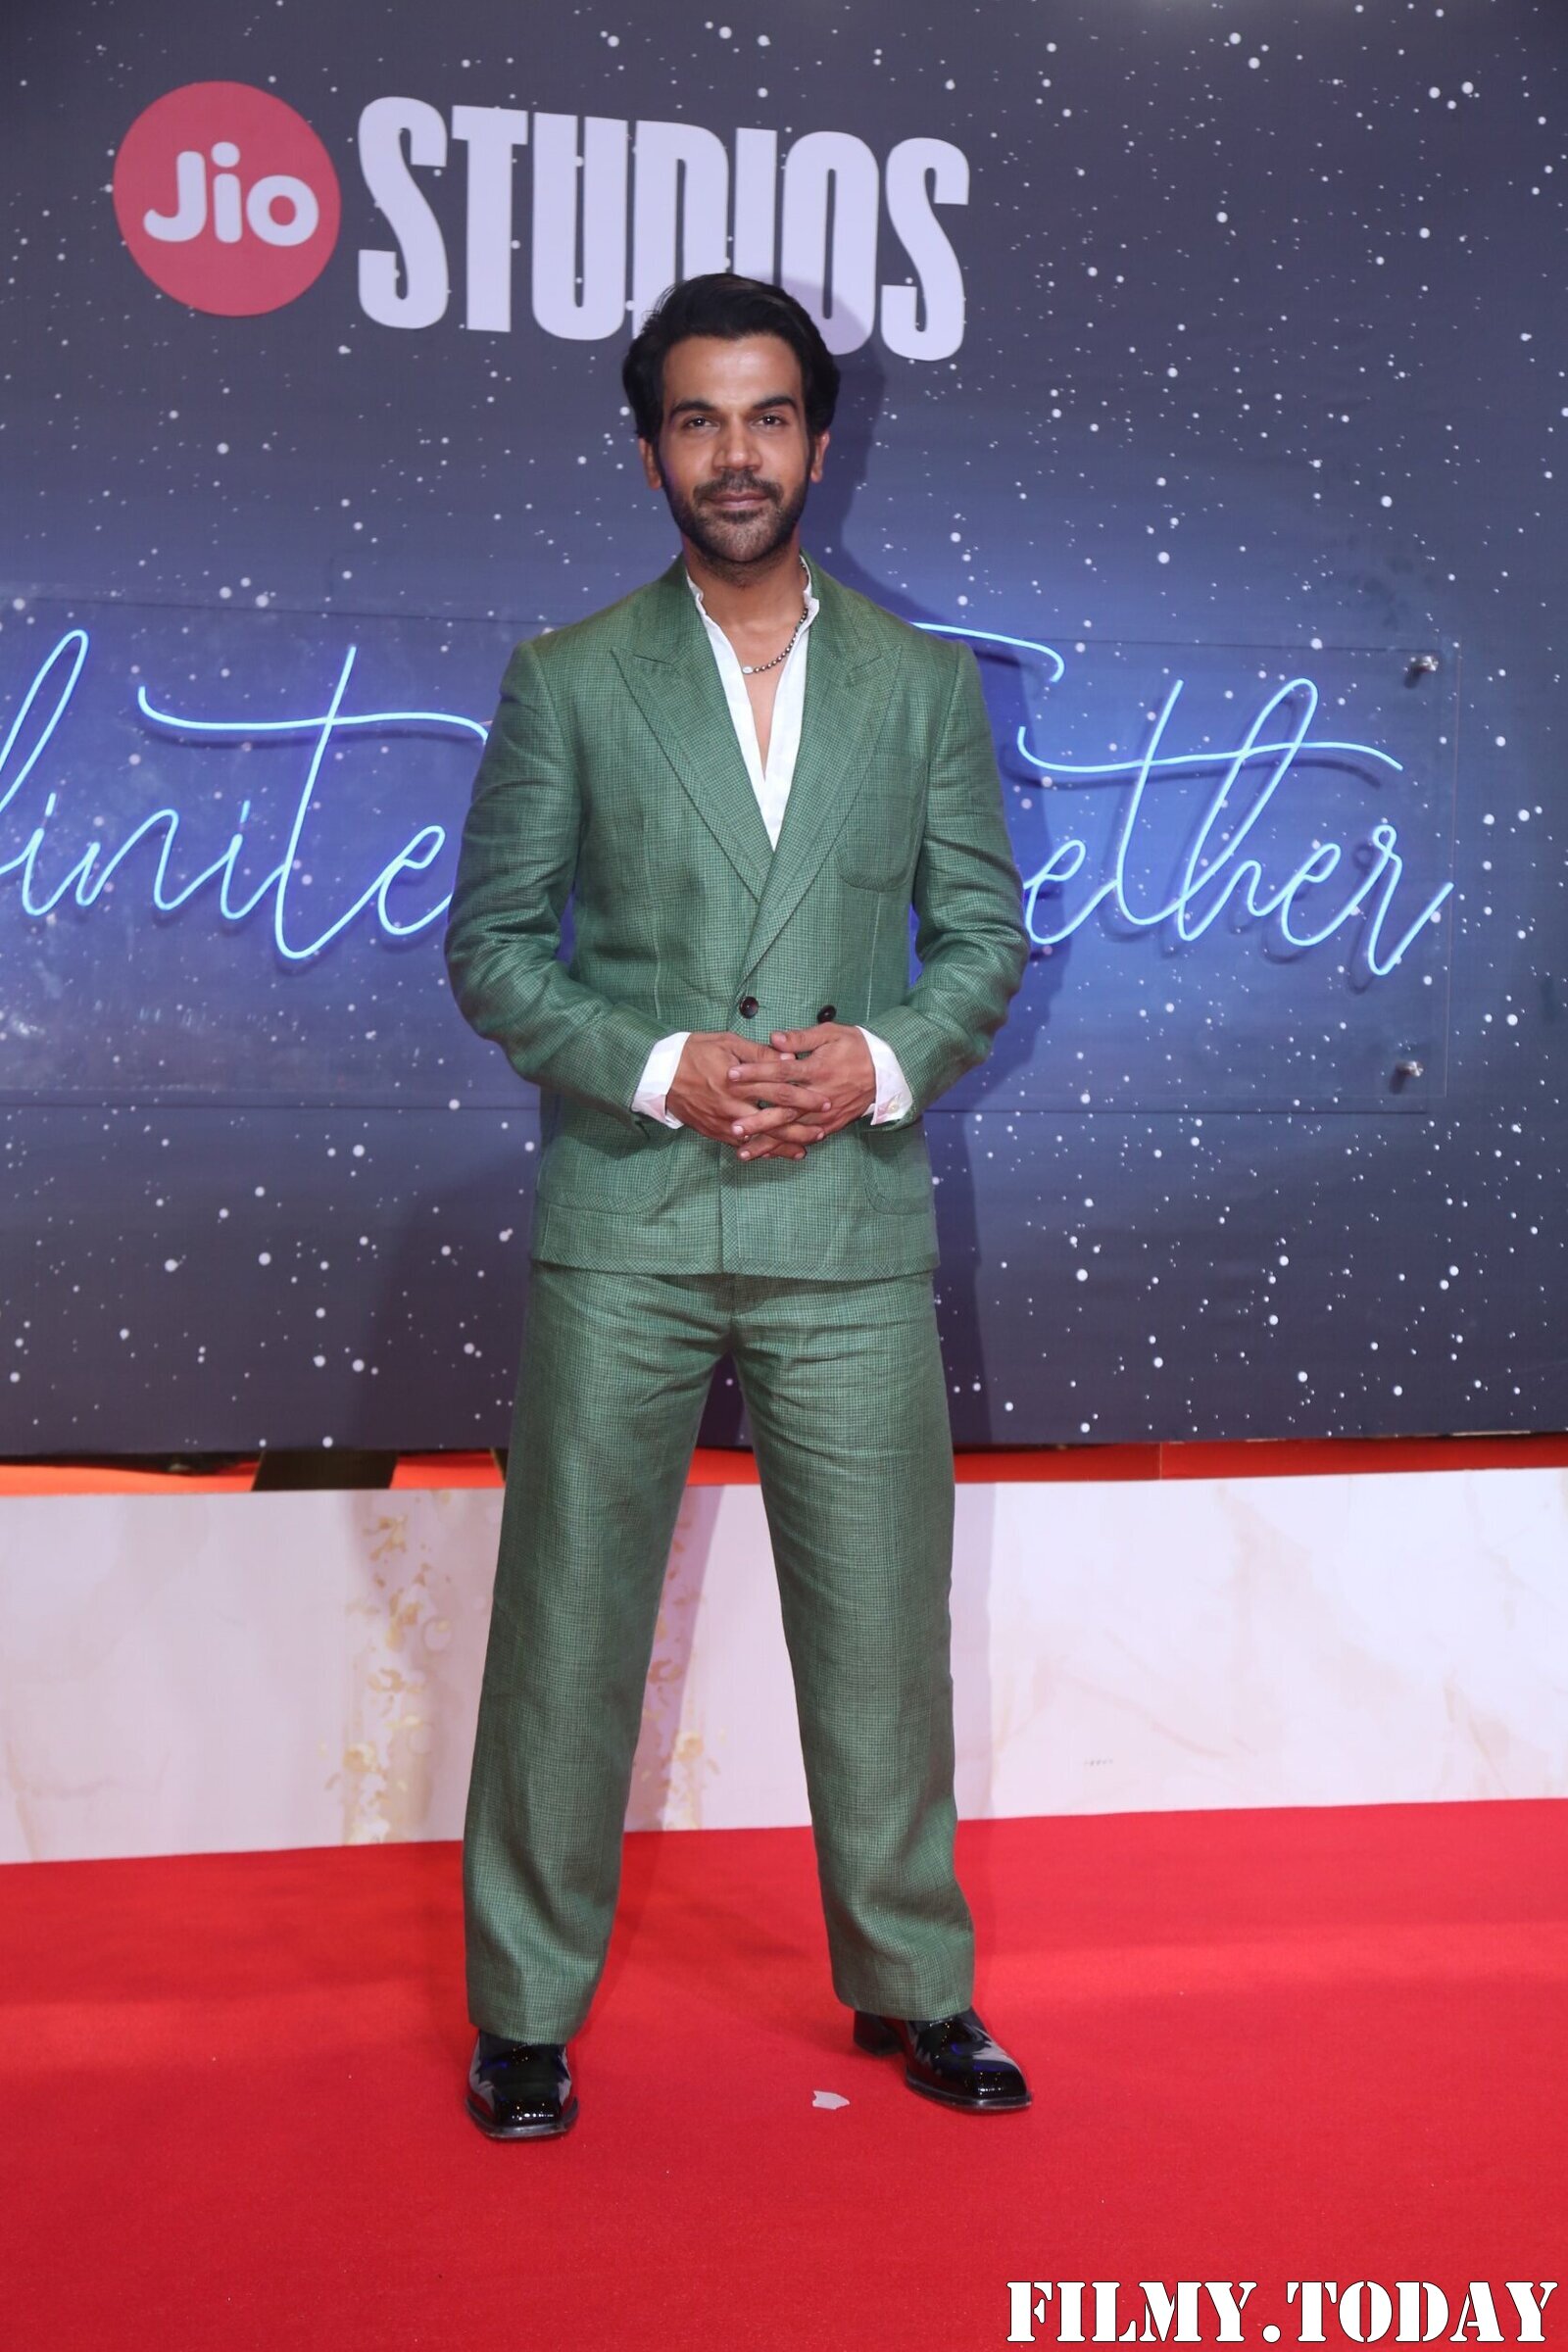 Rajkummar Rao - Photos: Celebs At The Red Carpet For Jio Studios Event Of Celebration And Surprise | Picture 1934245